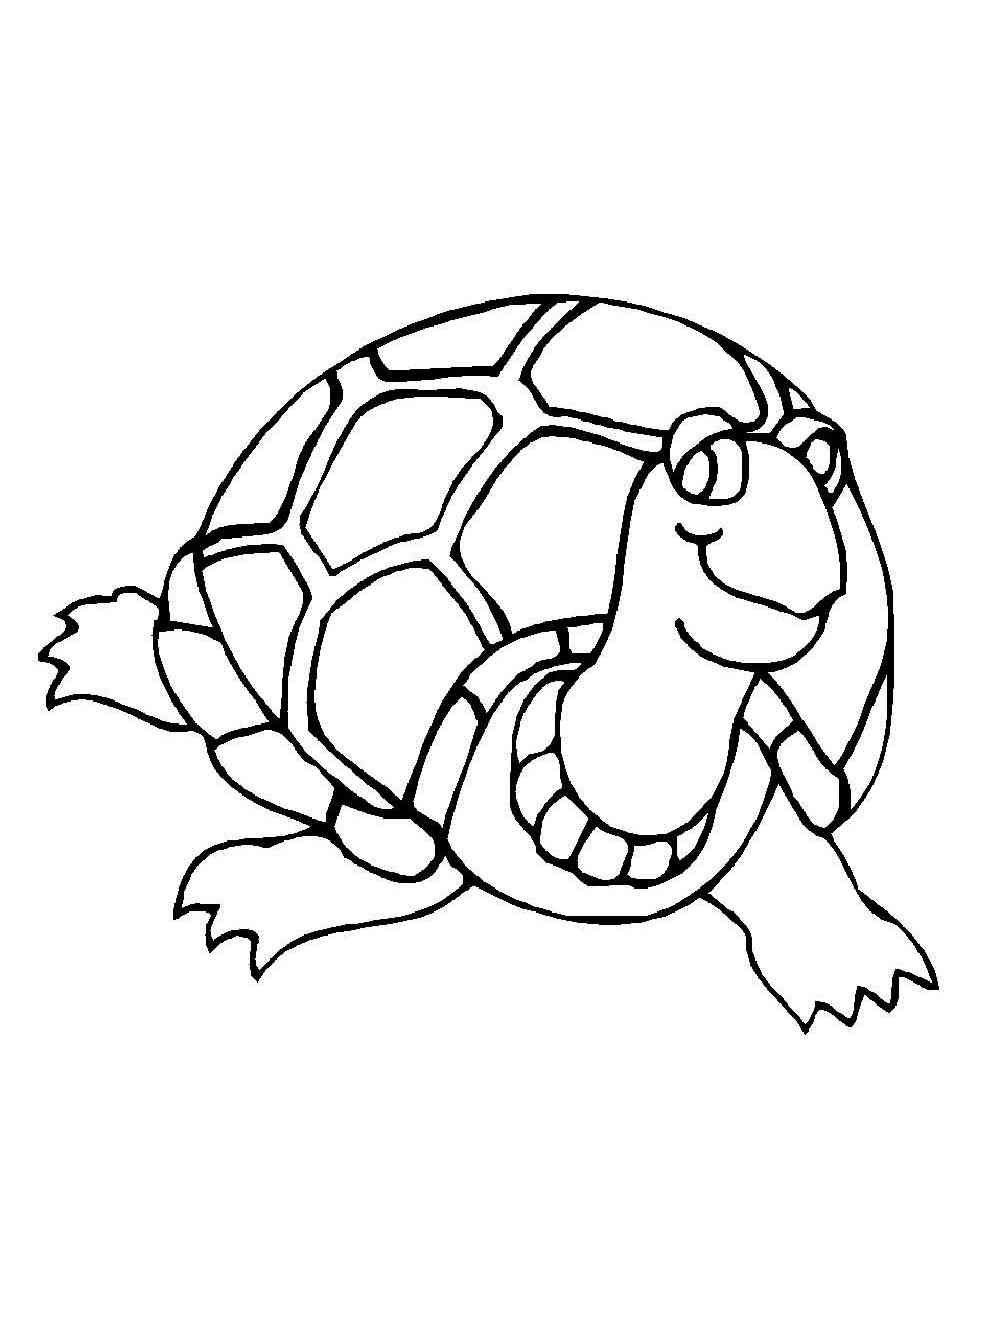 Simple Cartoon Turtle coloring page